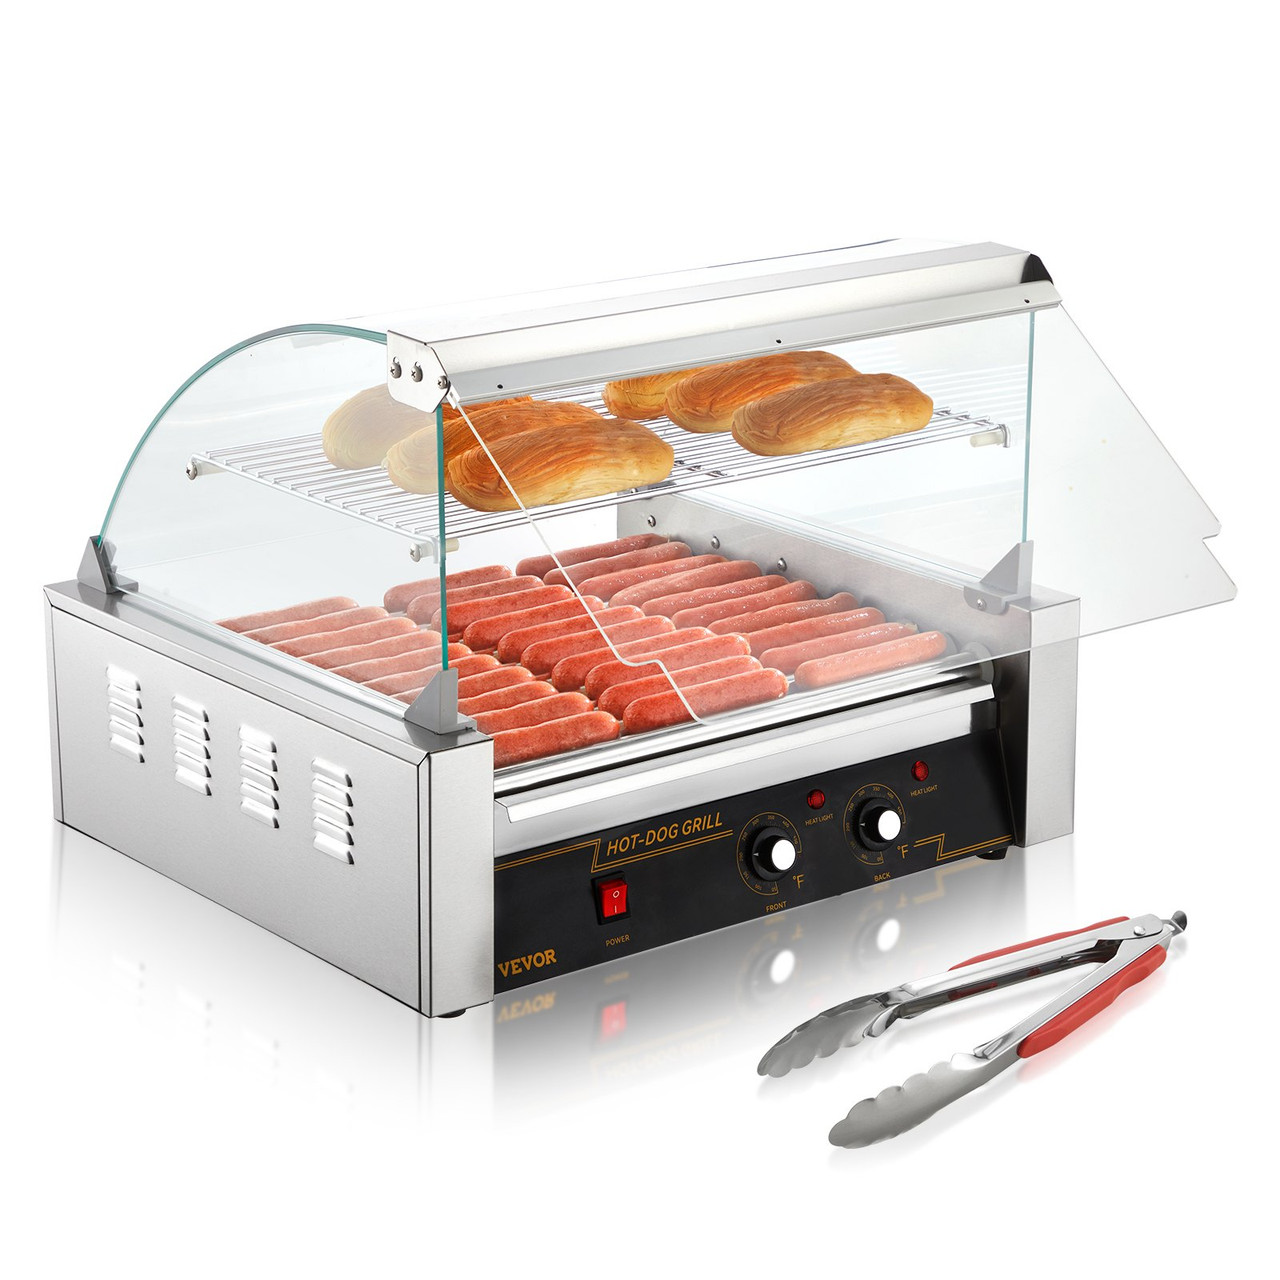 Hot Dog Roller, 11 Rollers 30 Hot Dogs Capacity, 1650W Stainless Sausage Grill Cooker Machine with Dual Temp Control Glass Hood Acrylic Cover Bun Warmer Shelf Removable Drip Tray, ETL Certified